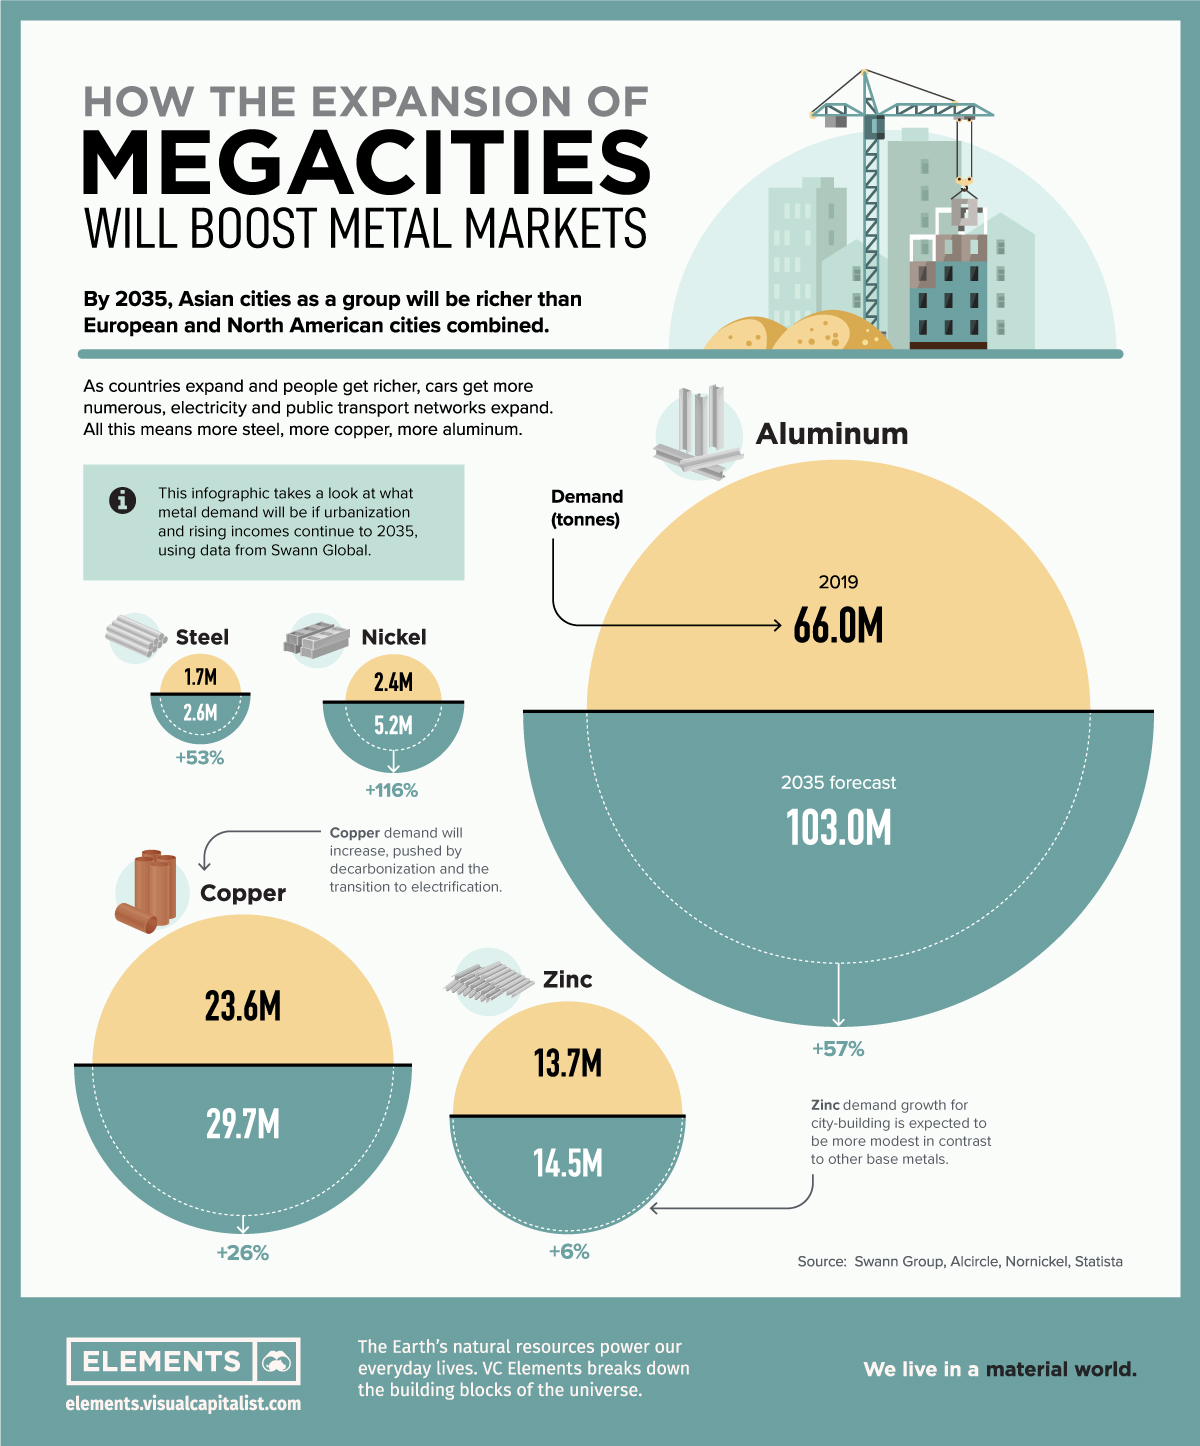 https://elements.visualcapitalist.com/wp-content/uploads/2022/01/How-the-Expansion-of-Megacities-Will-Boost-Metal-Markets-Full.jpg